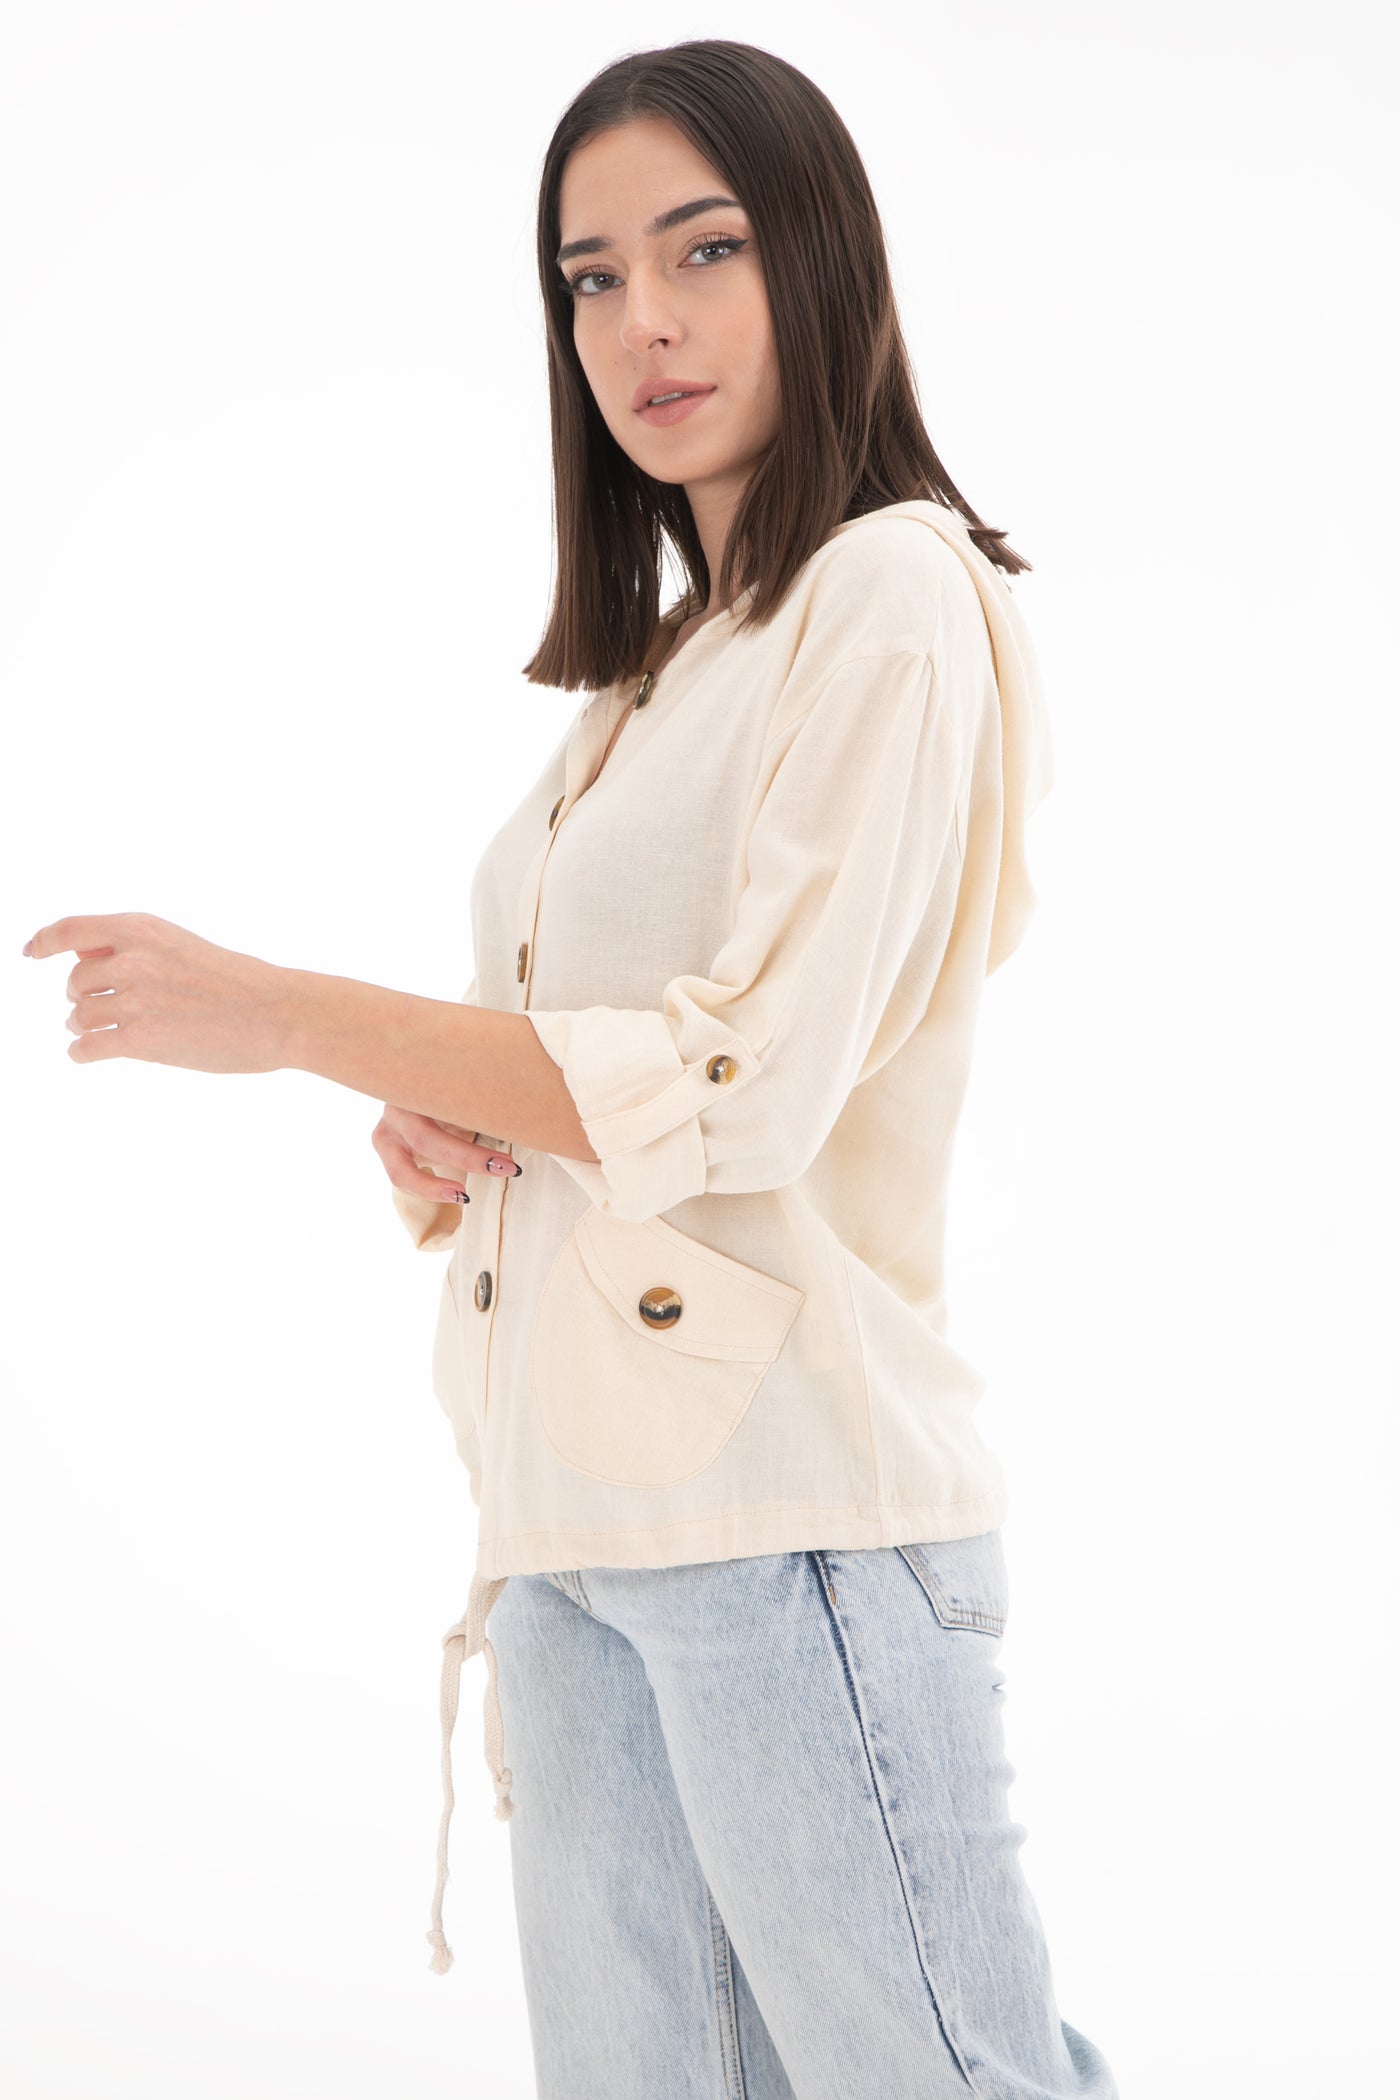 Chassca Cotton Shirt Jacket With Hood